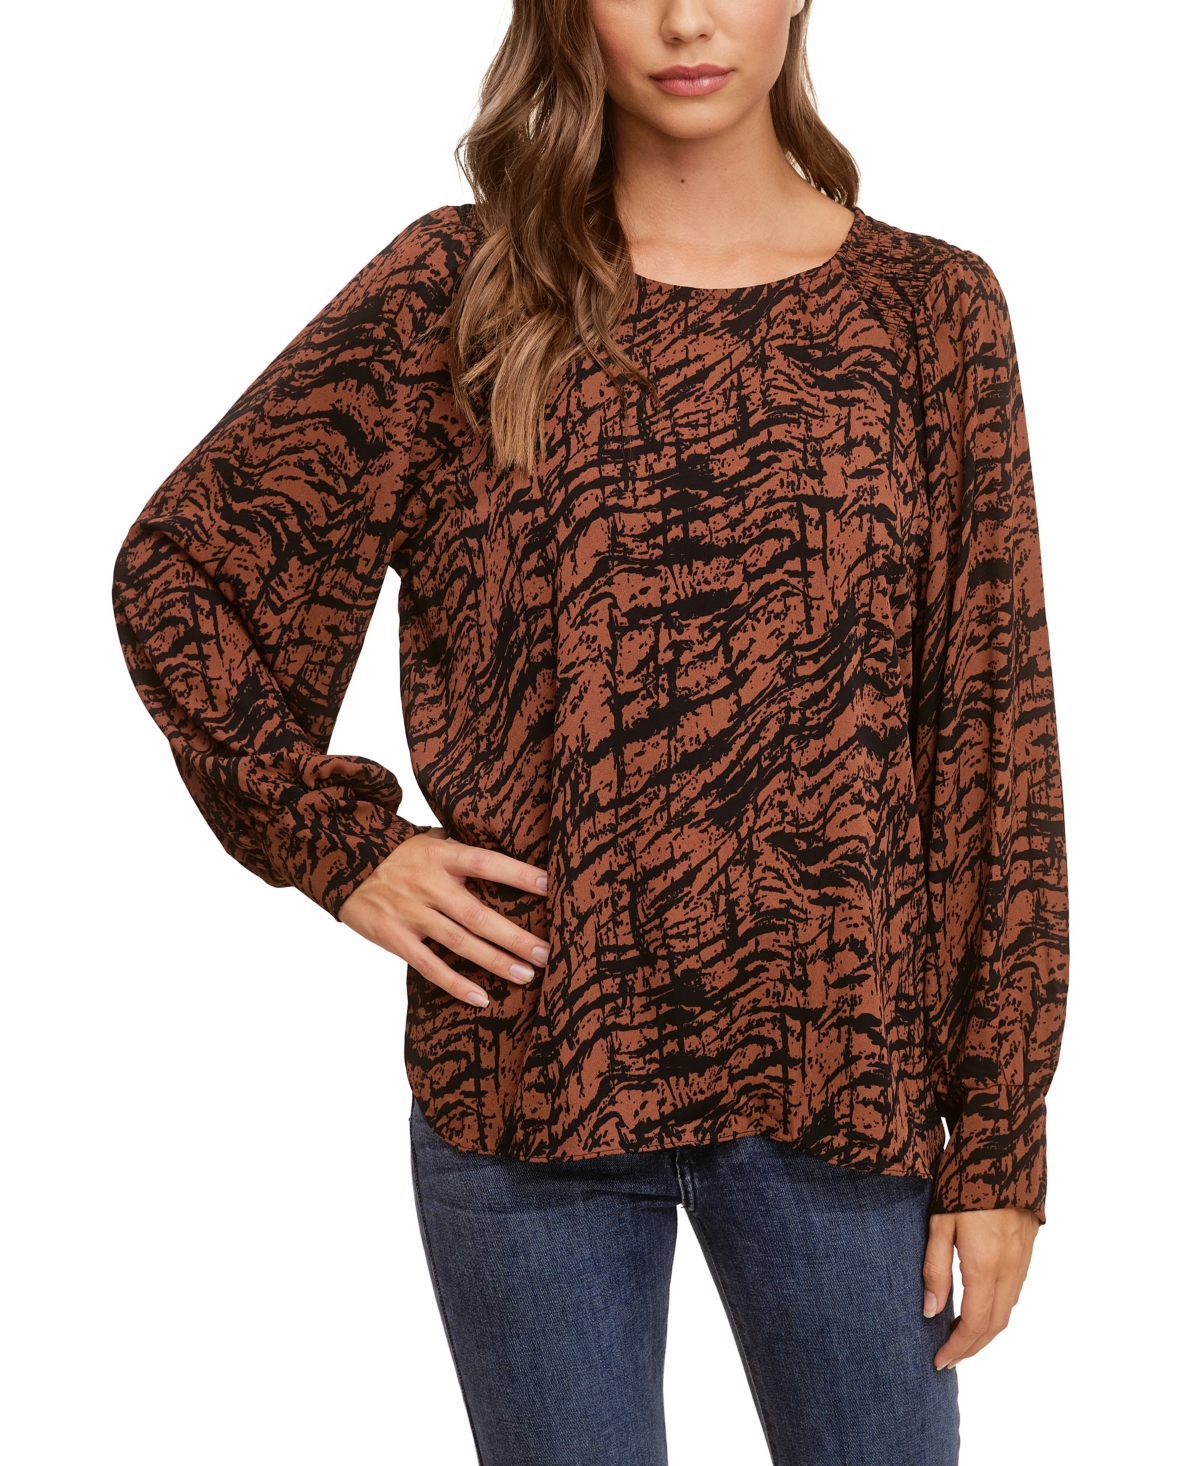 Women's Printed Soft Crepe Blouse with Smocking - Brown, Black